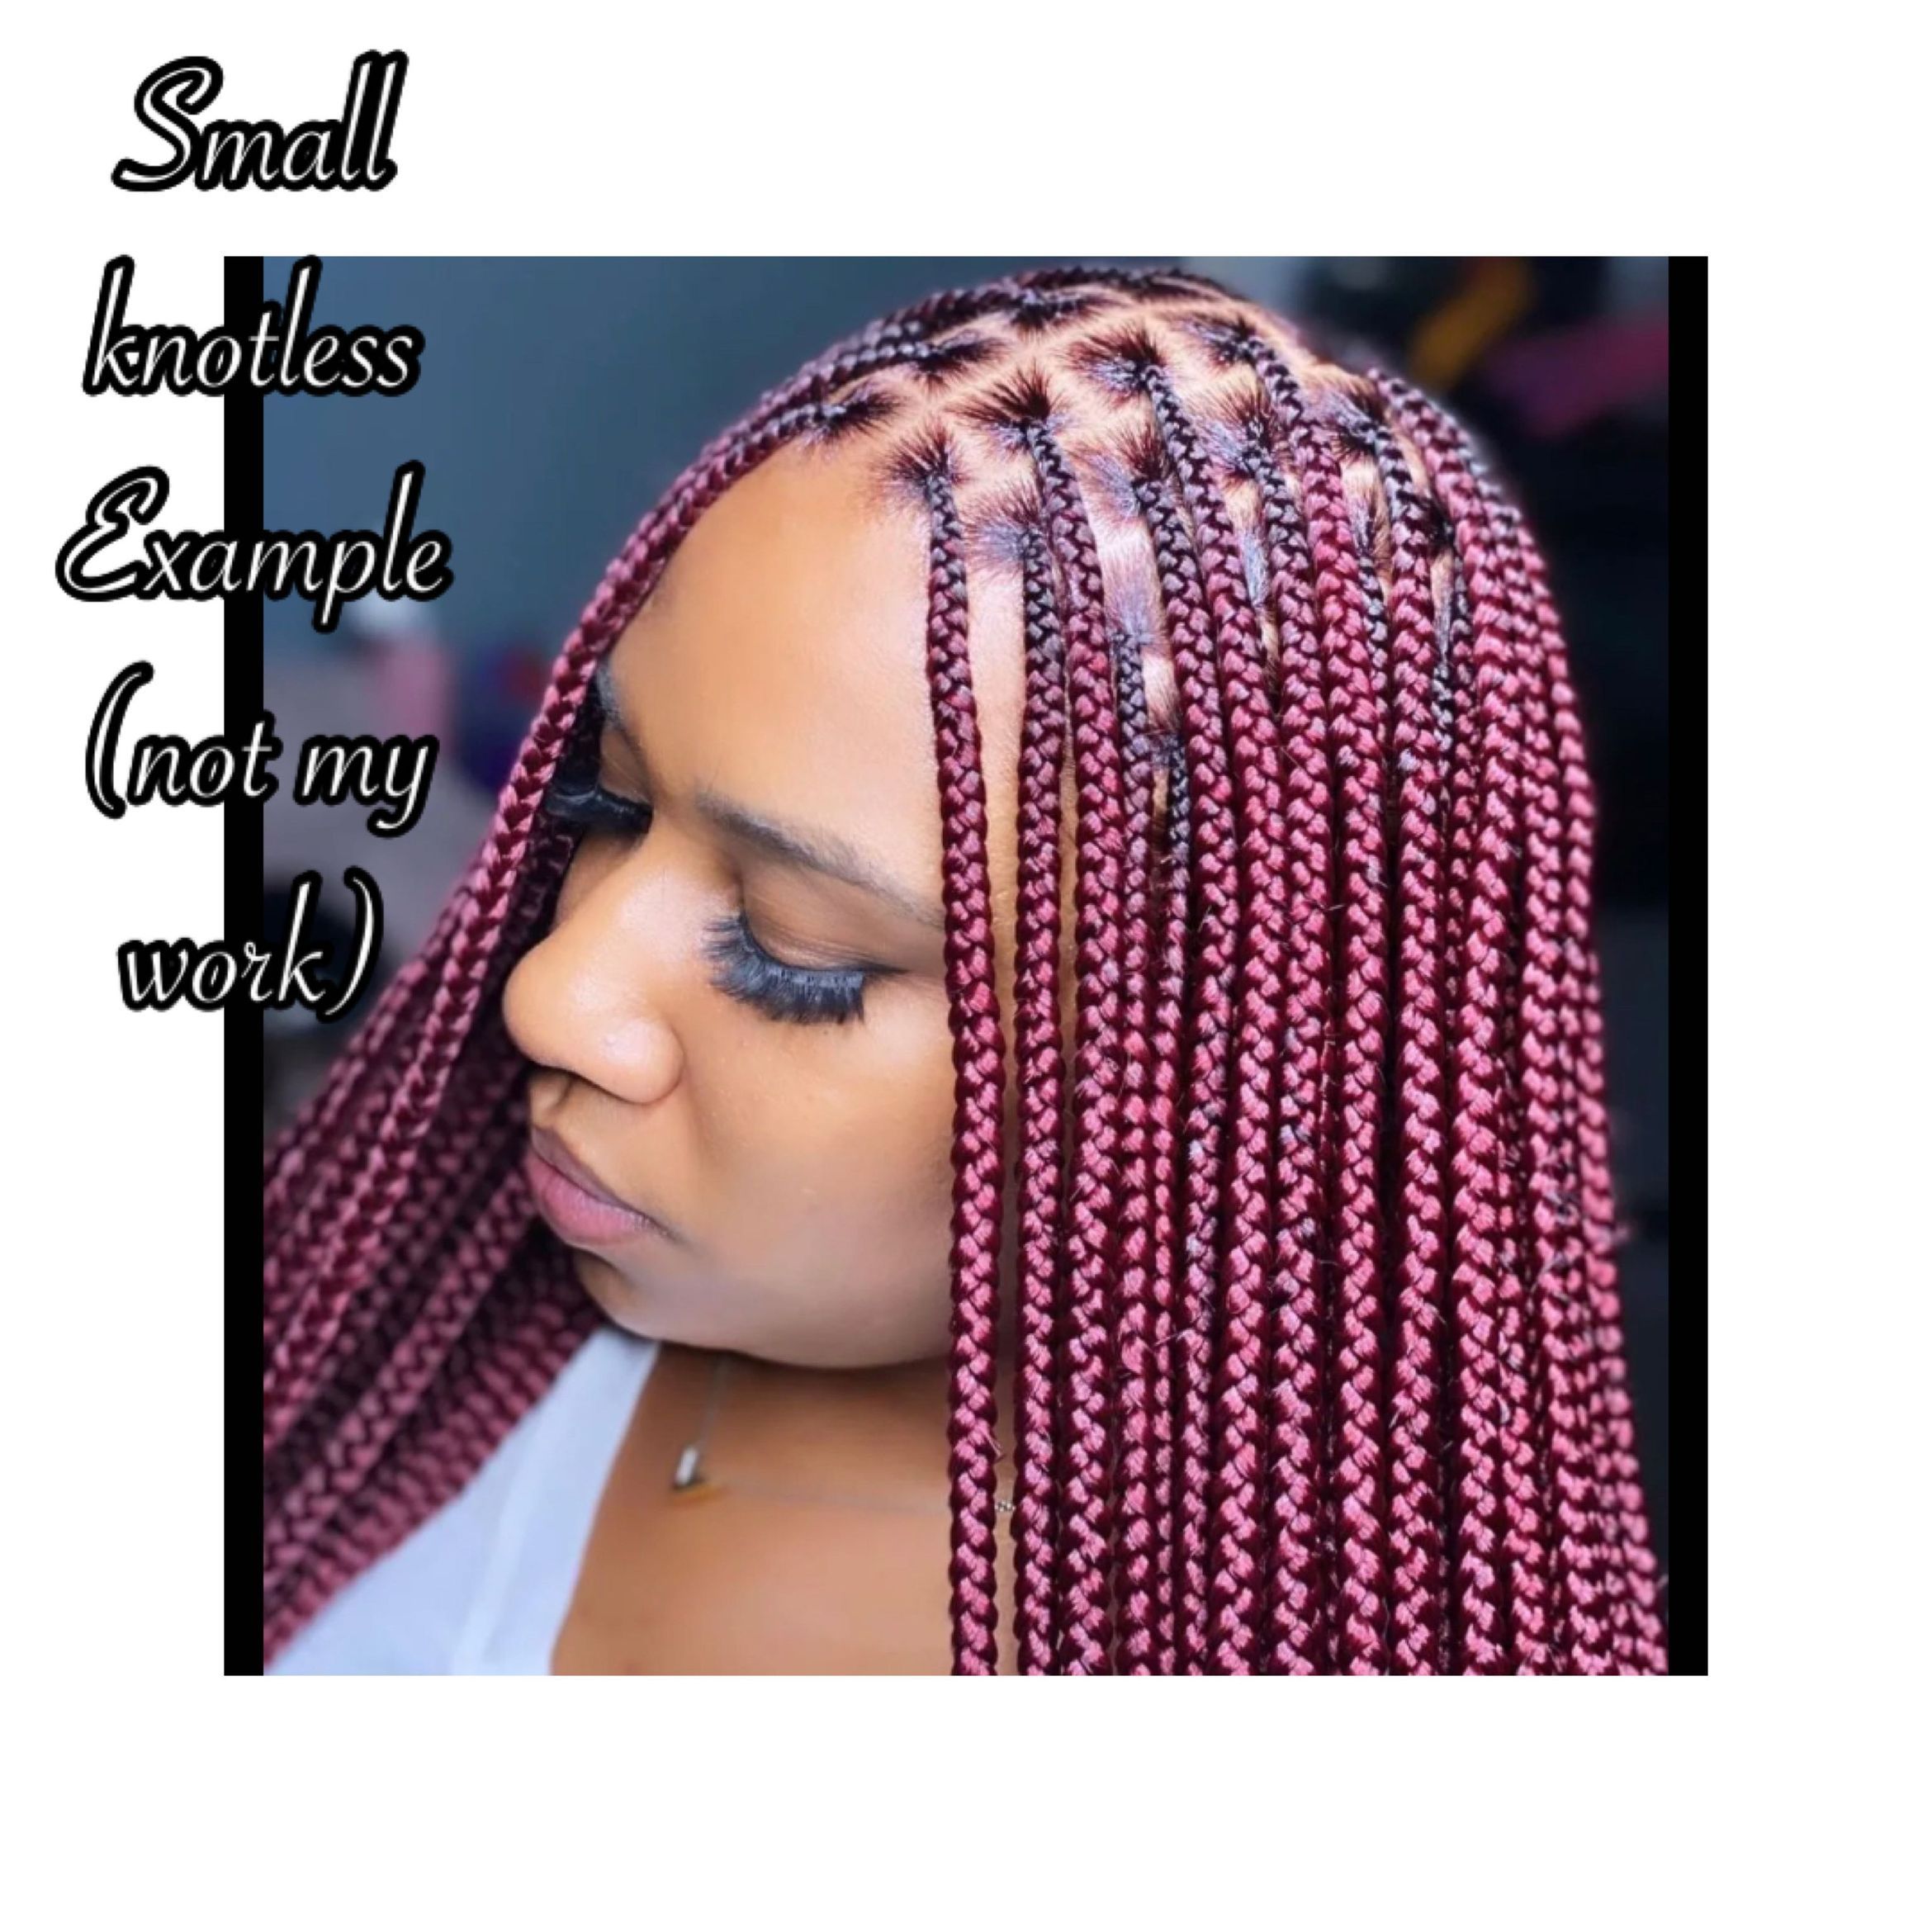 Small Knotless hair included 30’ portfolio